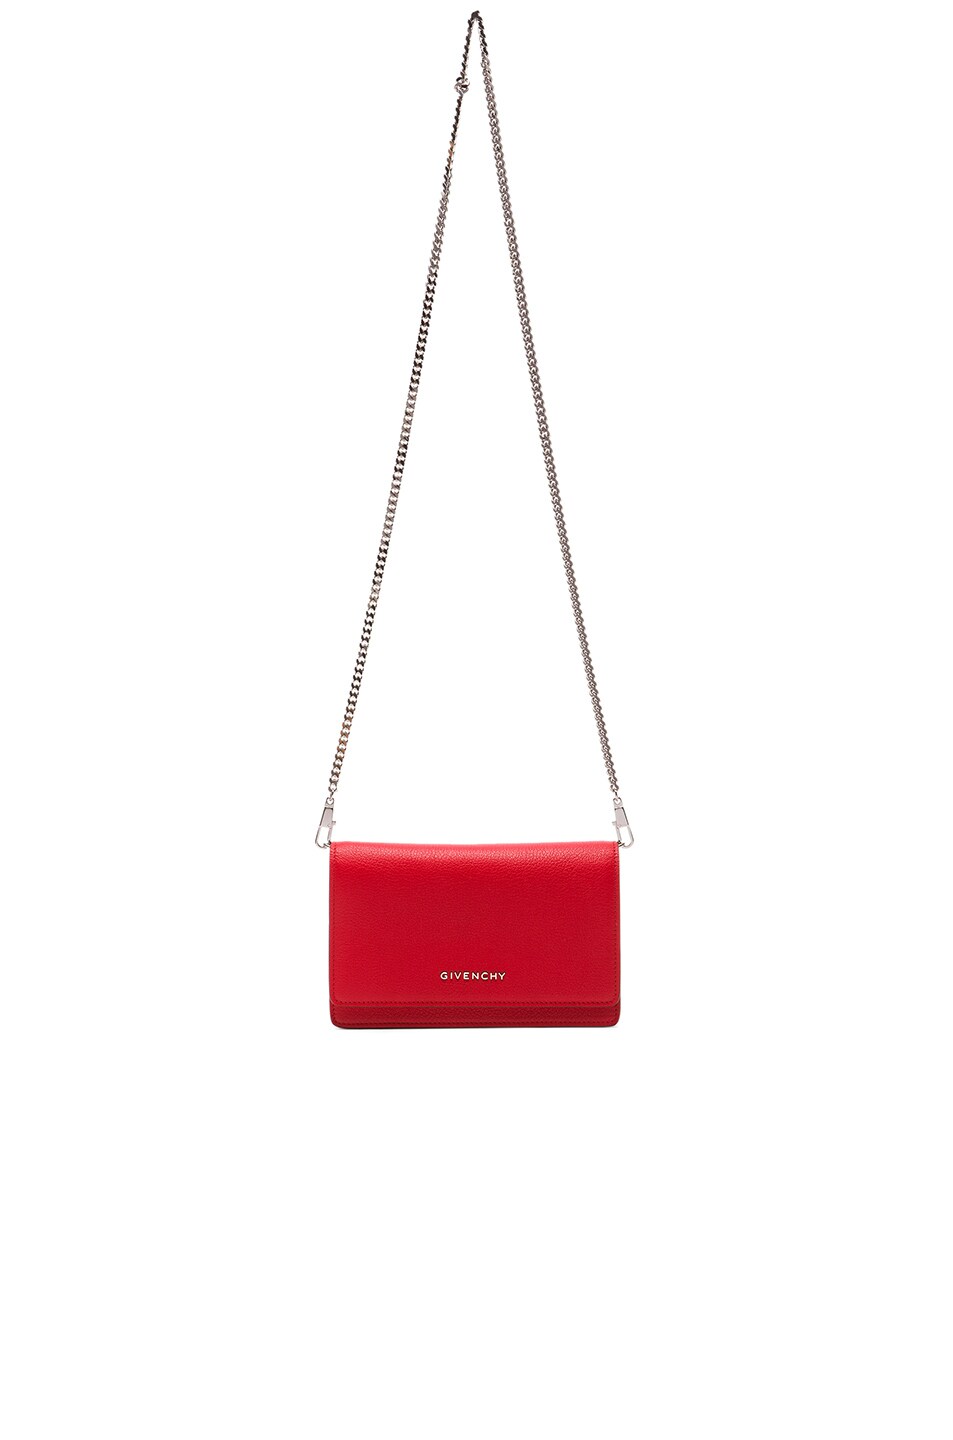 Image 1 of Givenchy Pandora Chain Wallet in Medium Red